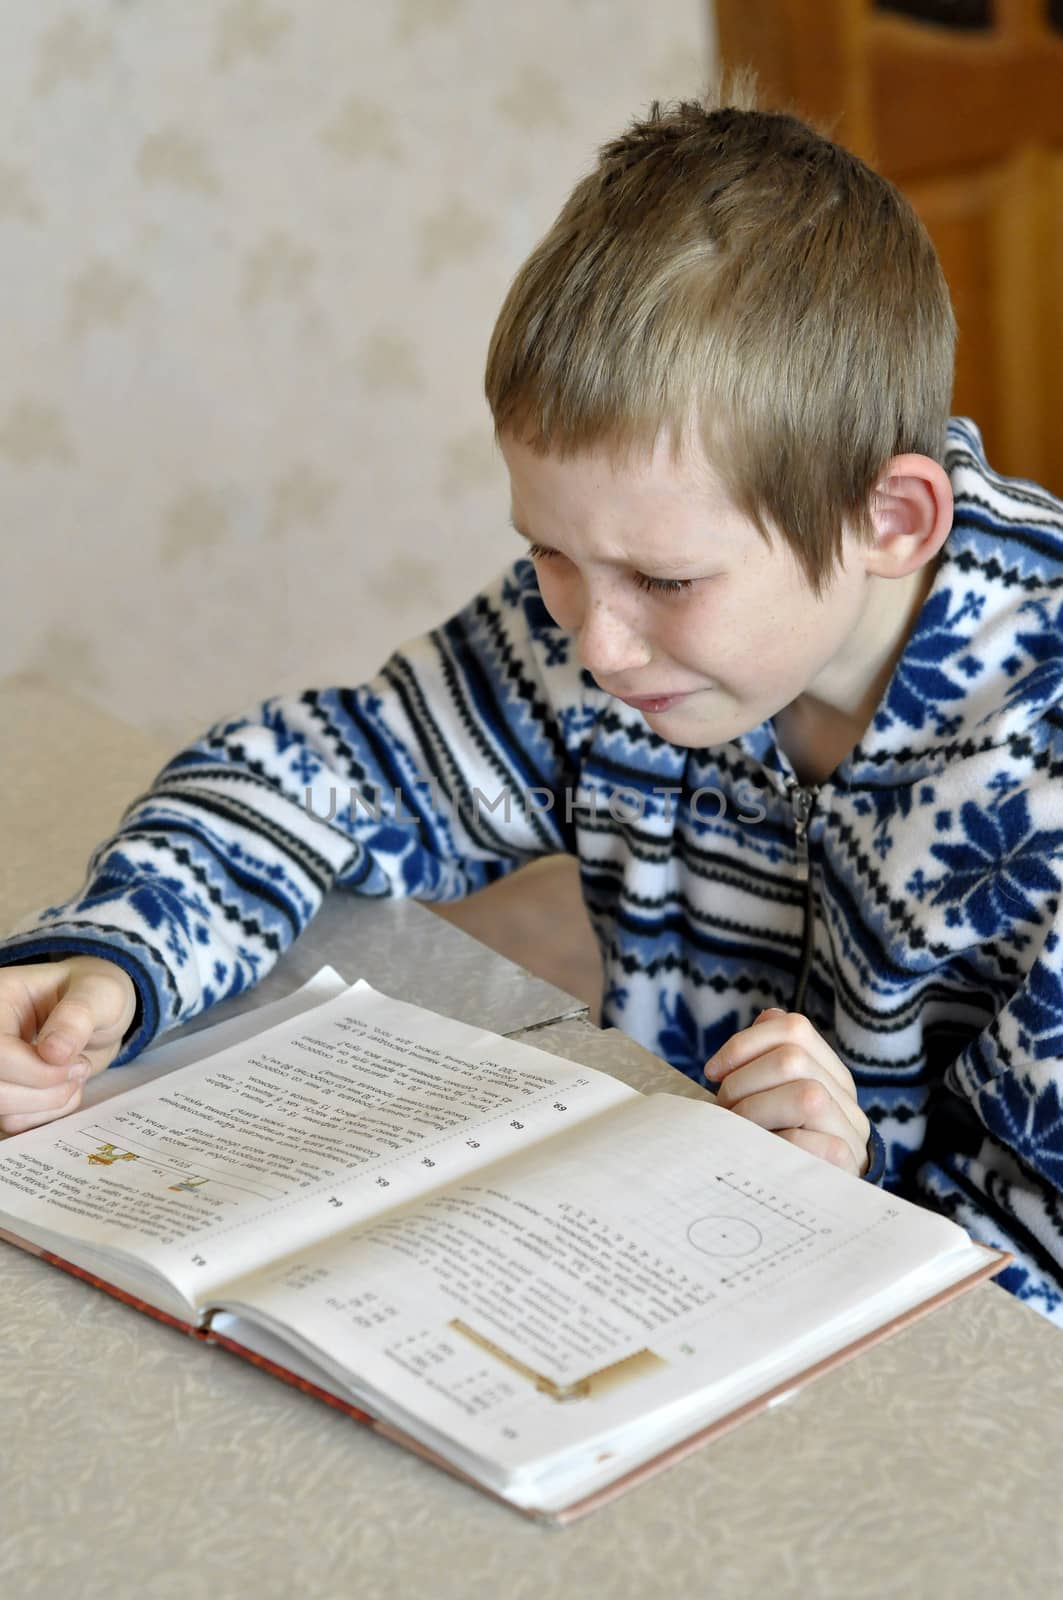 The 10-year-old boy with tears in the eyes sits before the textbook, doing homework